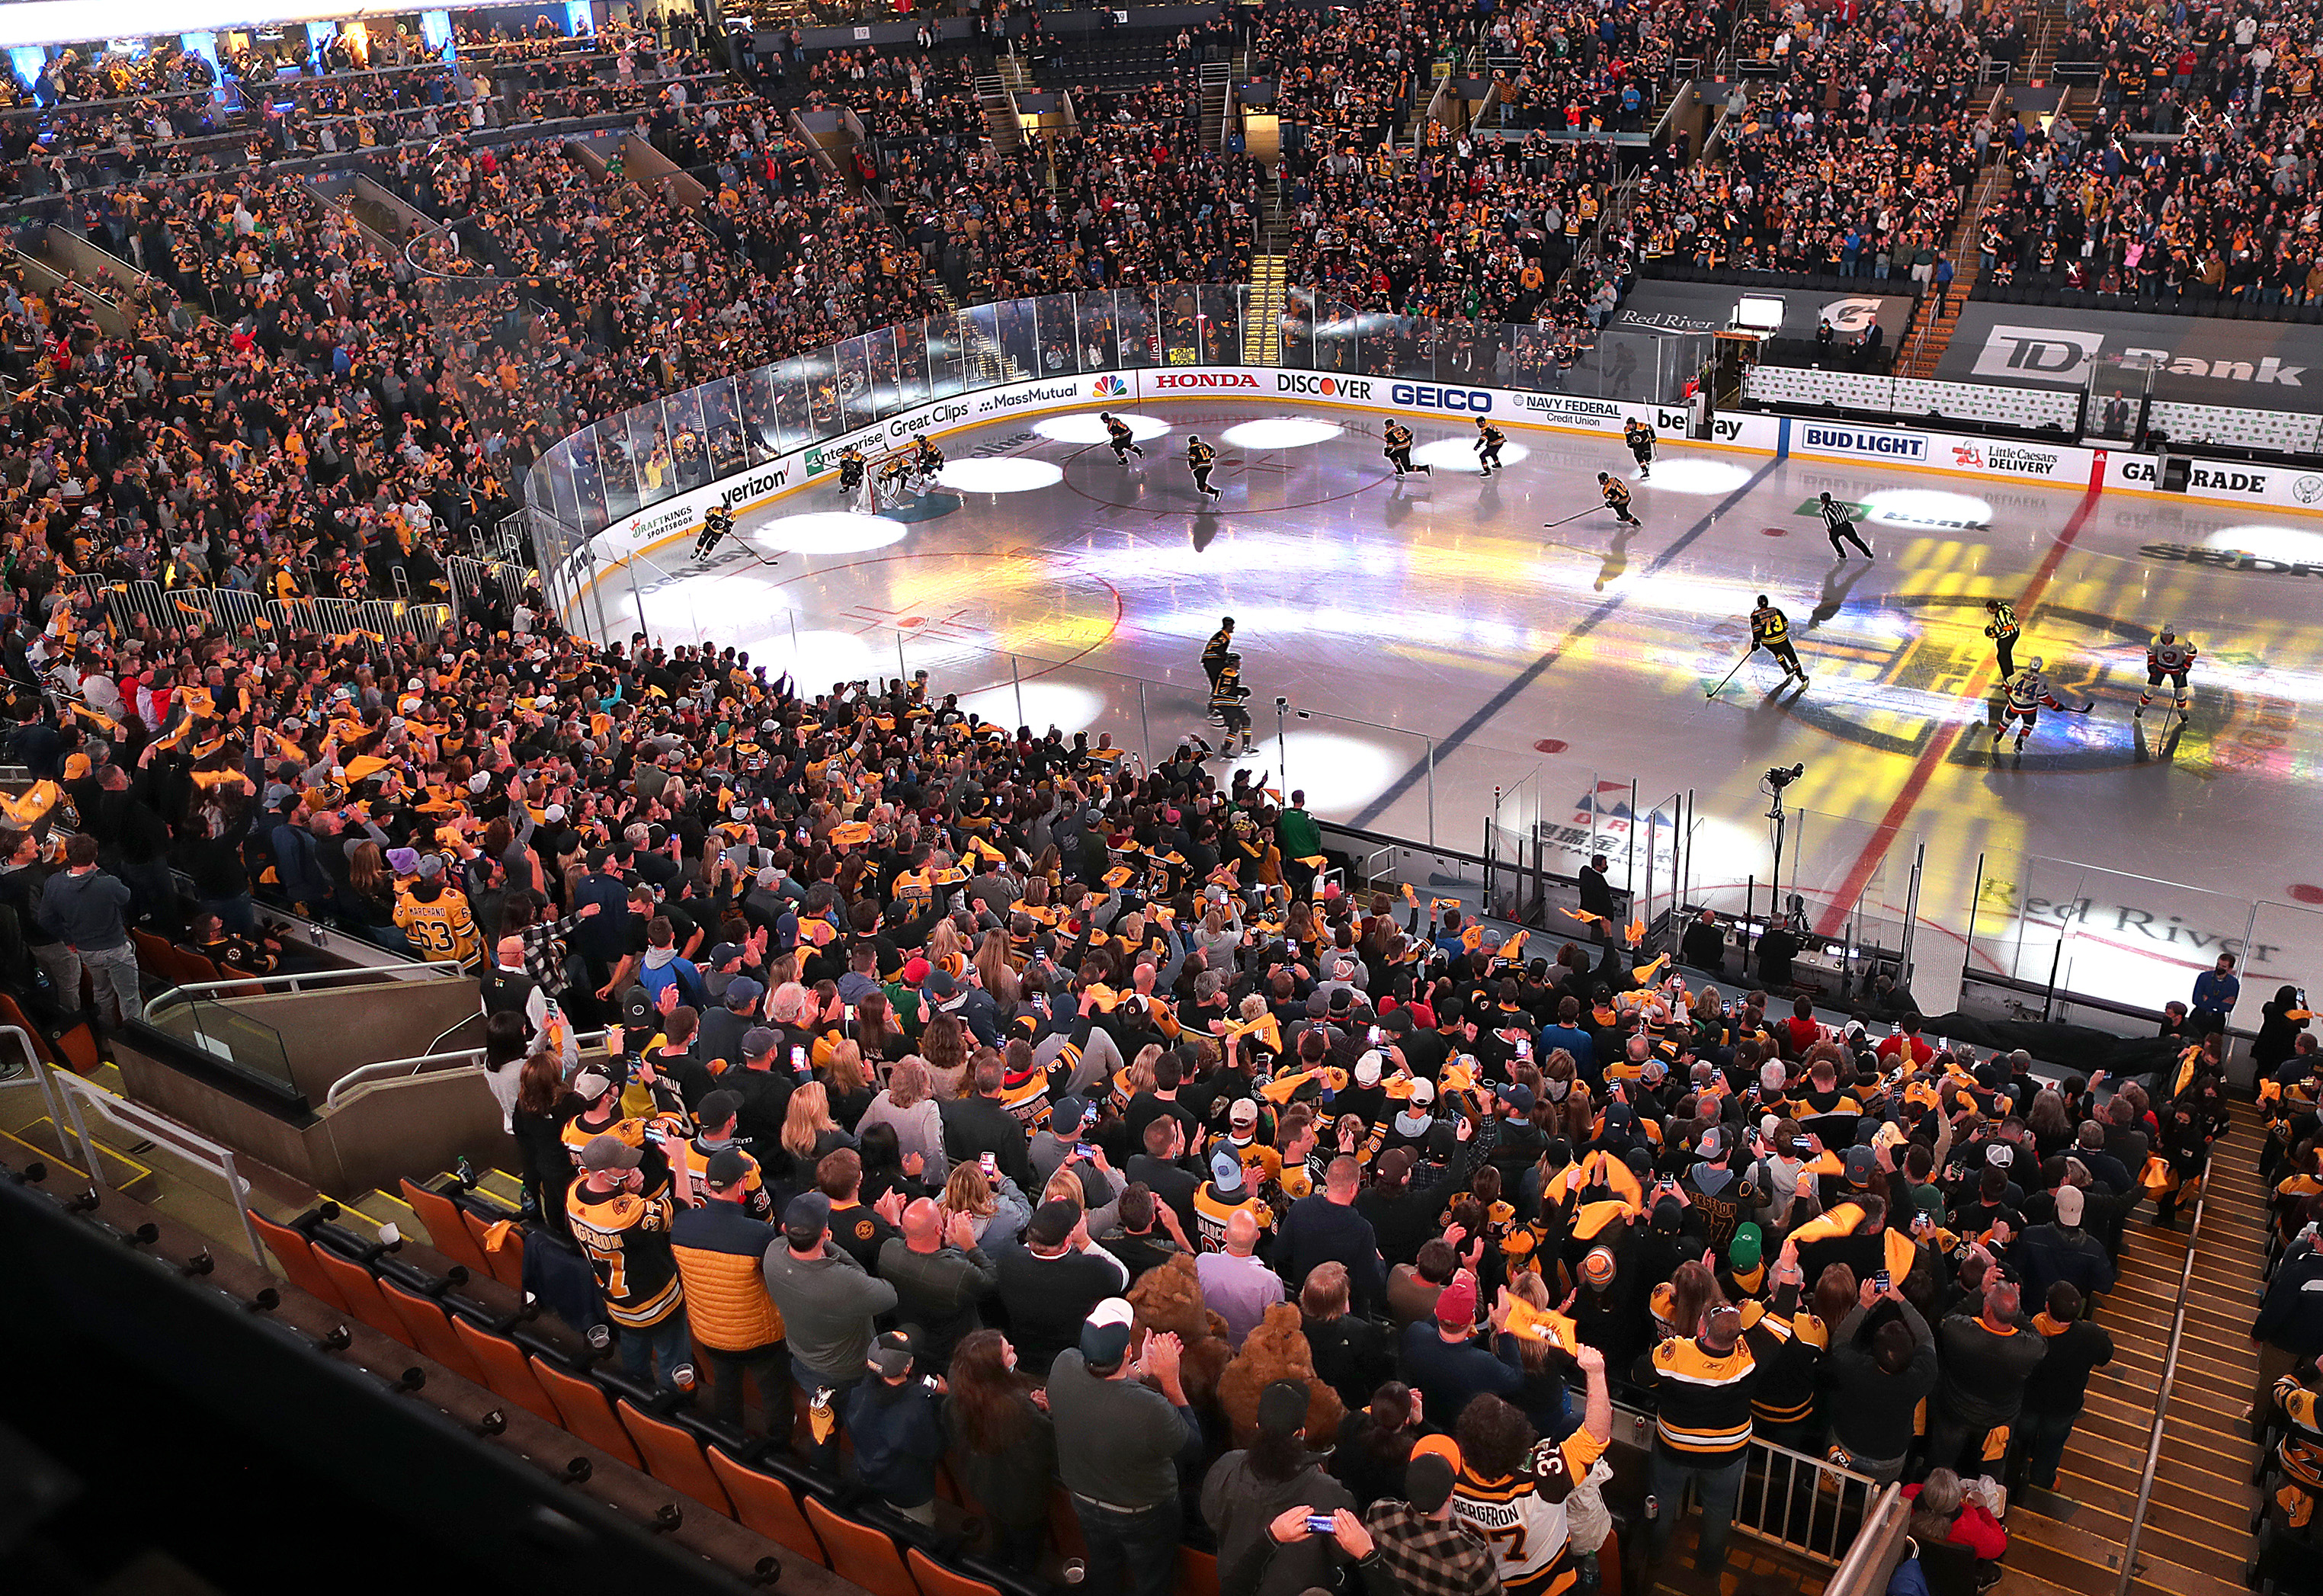 With A Packed House In Td Garden For Bruins Islanders The Buzz Was Back In The City The Boston Globe